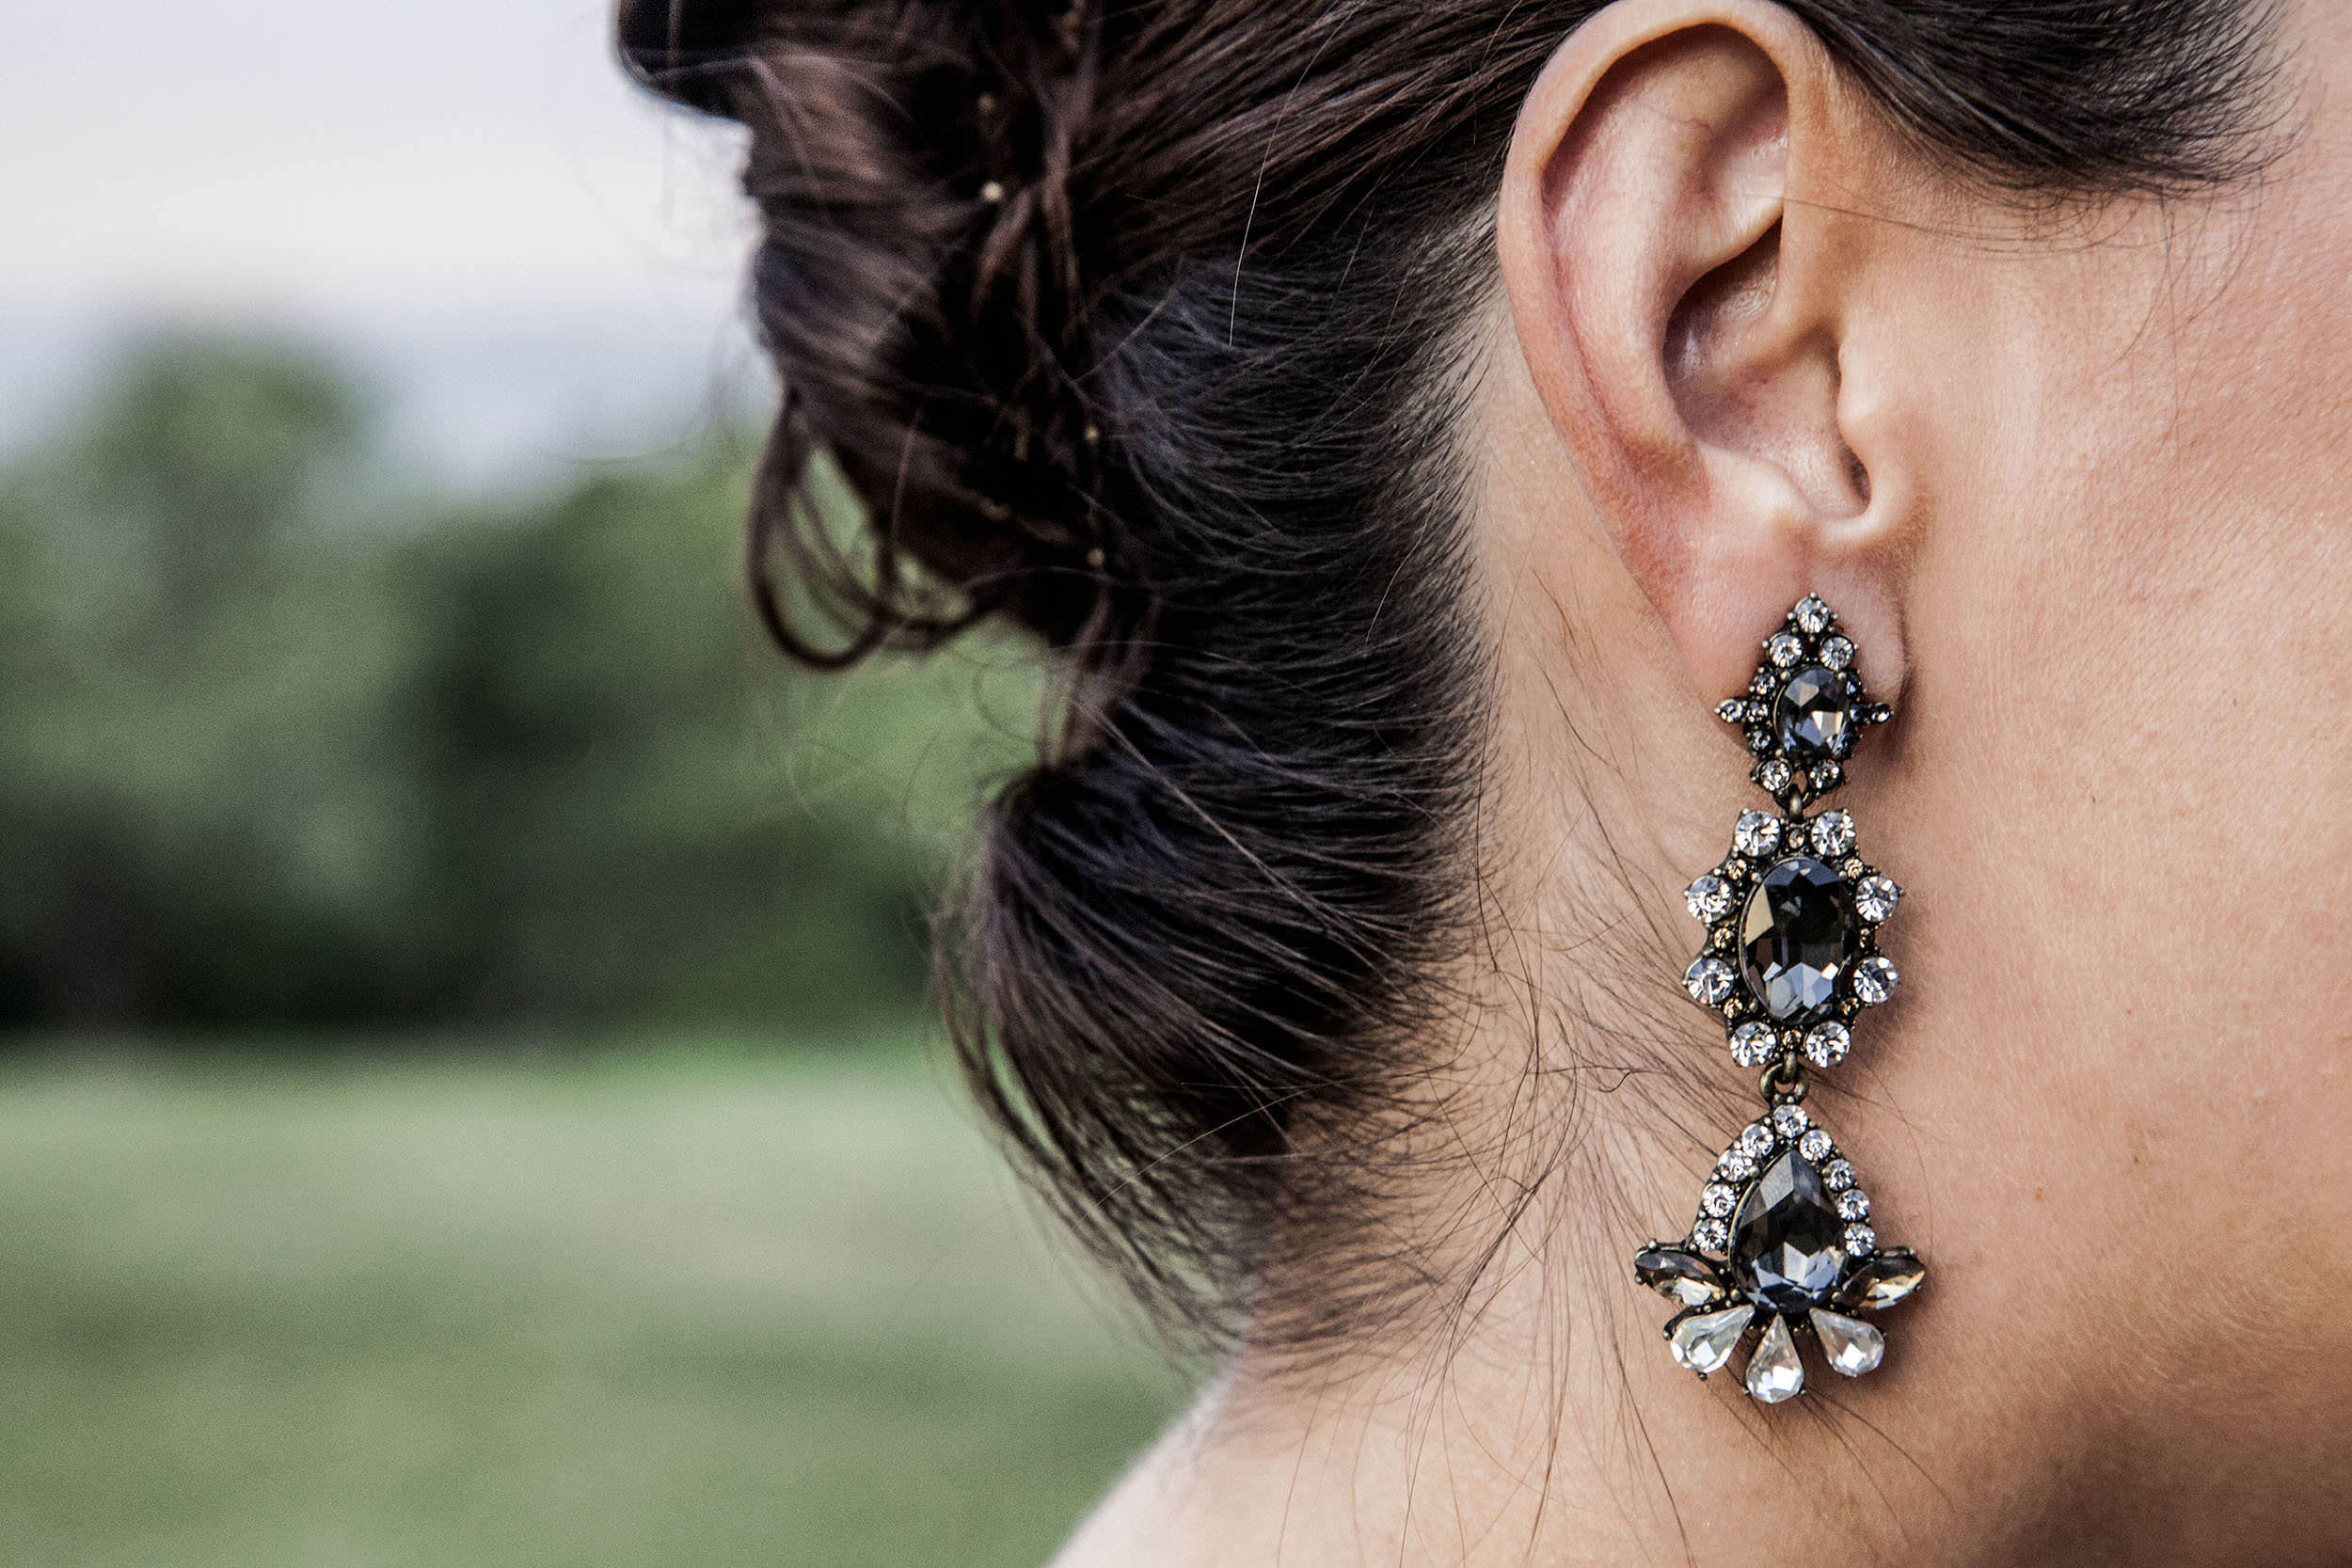 earrings on wedding guest at Crane Estate reception New England USA